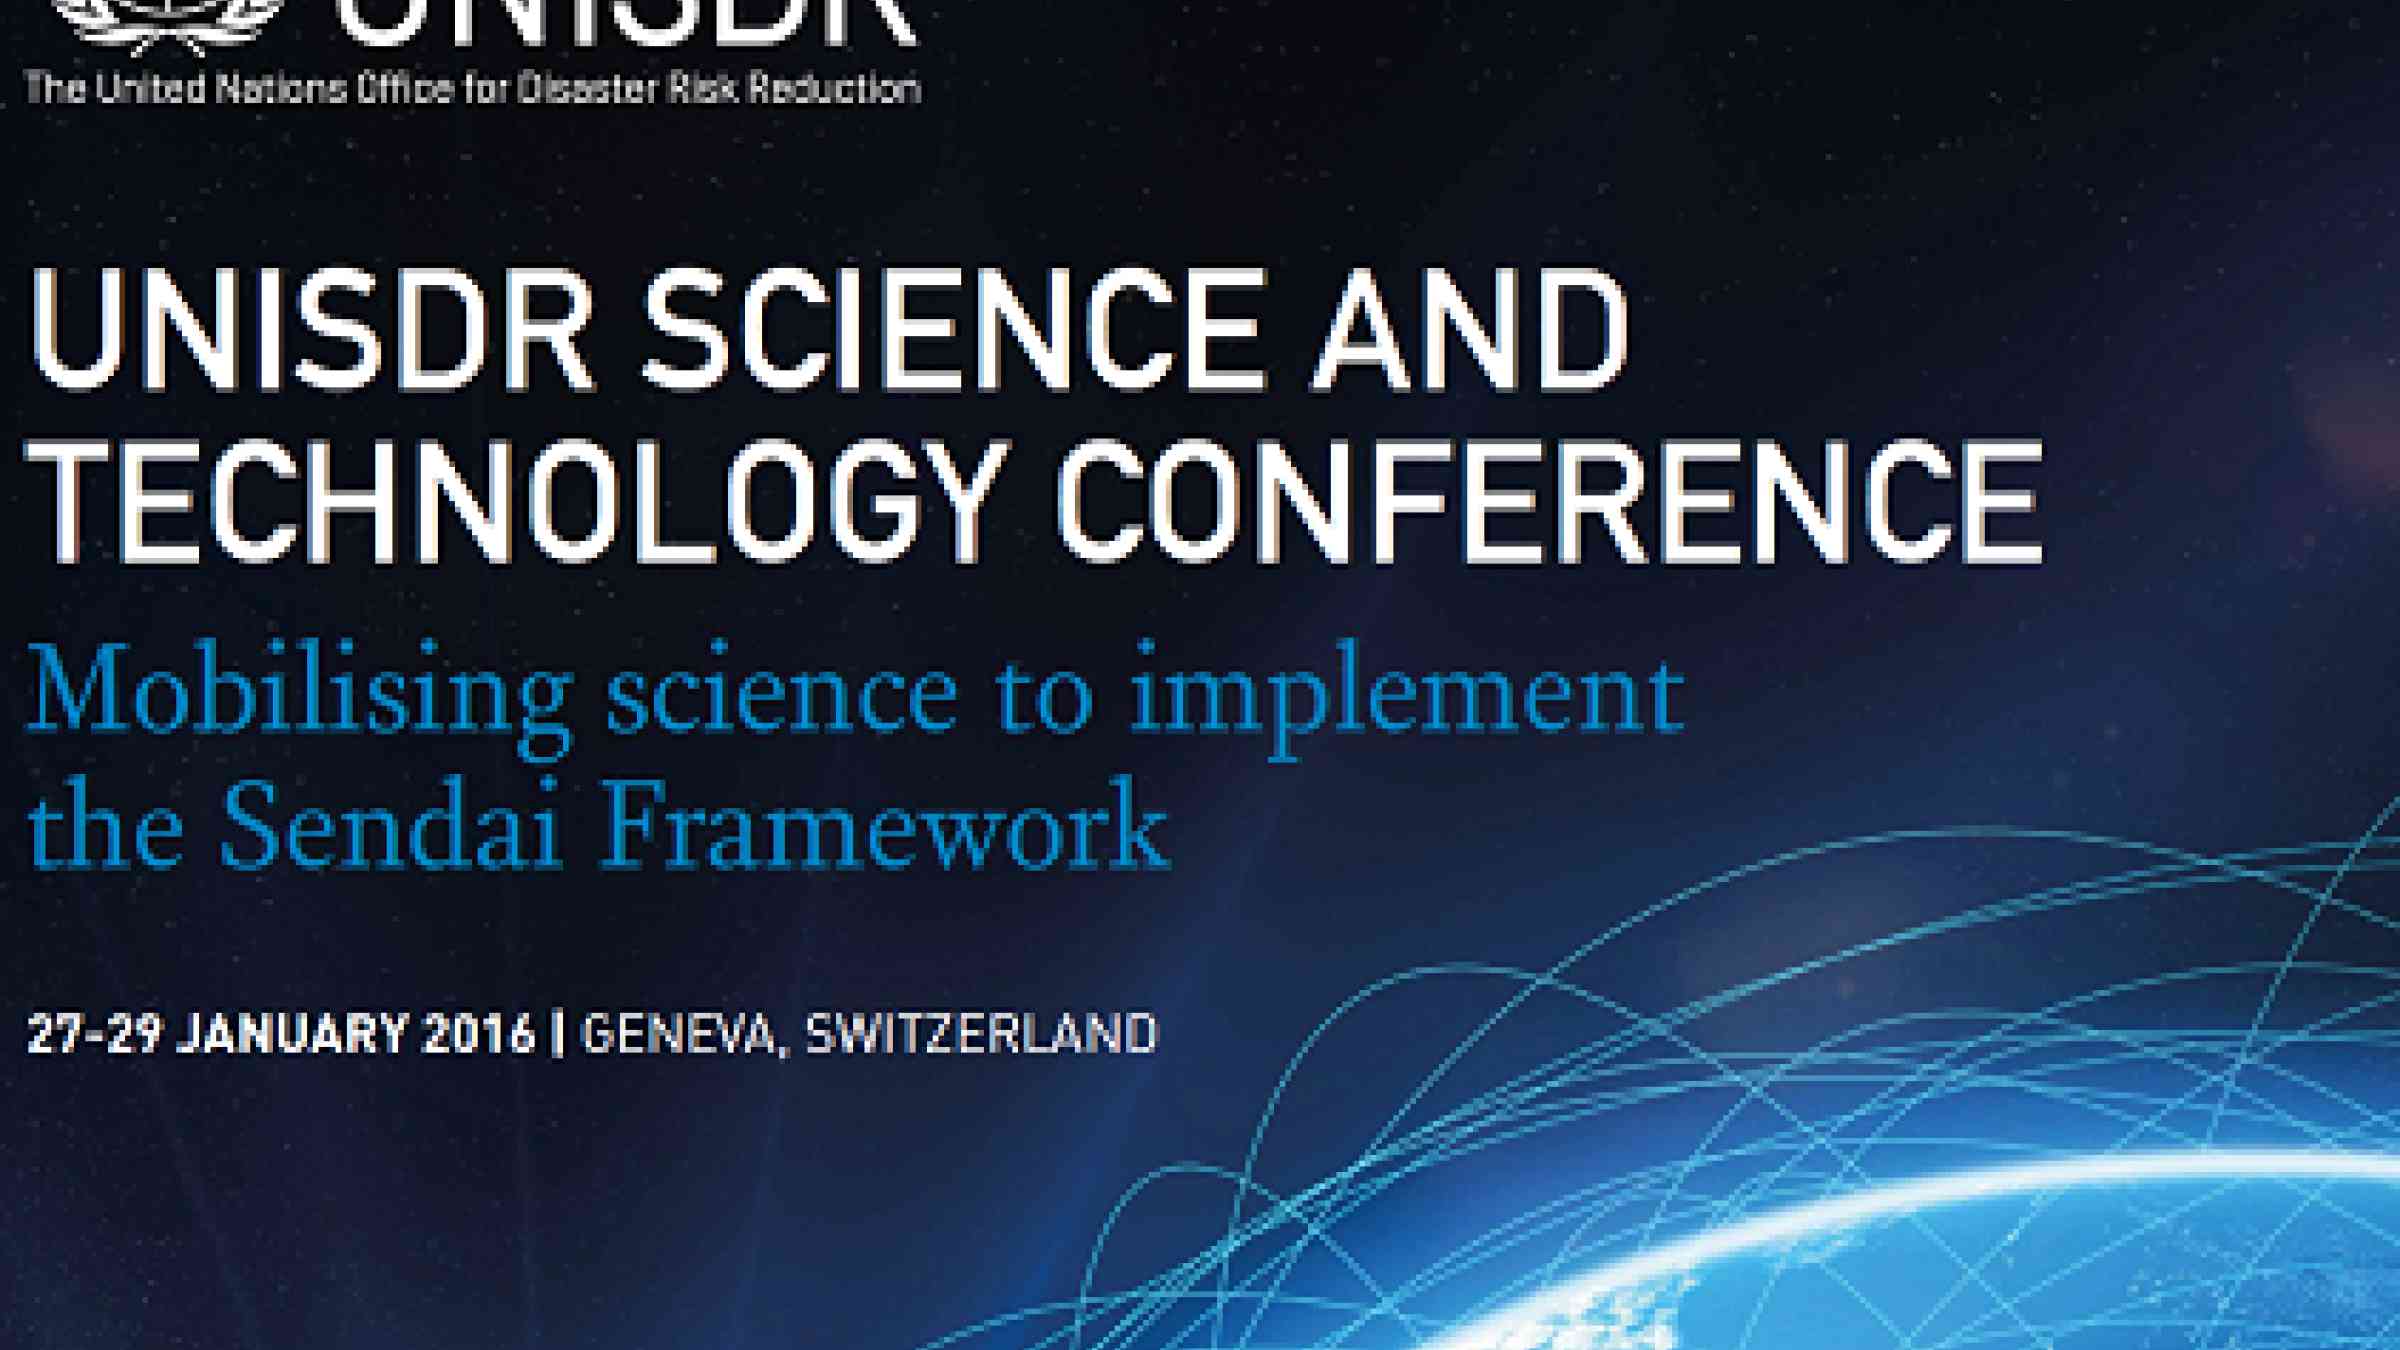 The UNISDR Science and Technology Conference begins on Wednesday (Photo: UNISDR)